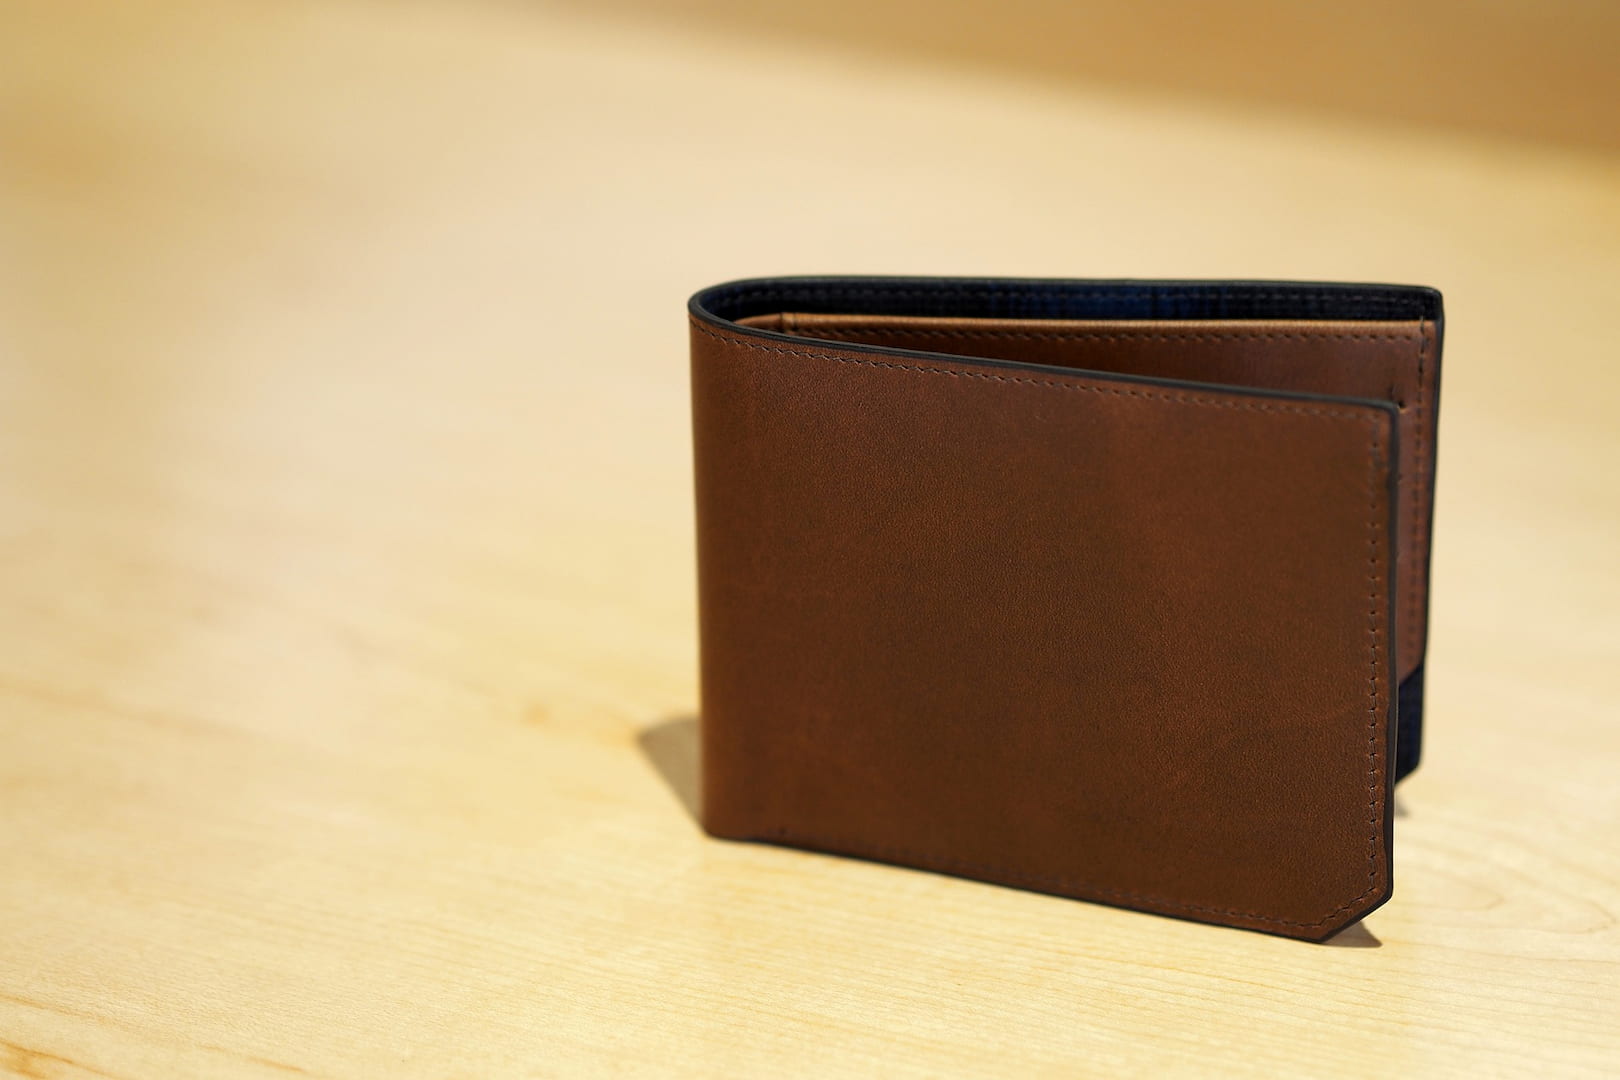 Leather wallet standing on a wooden surface